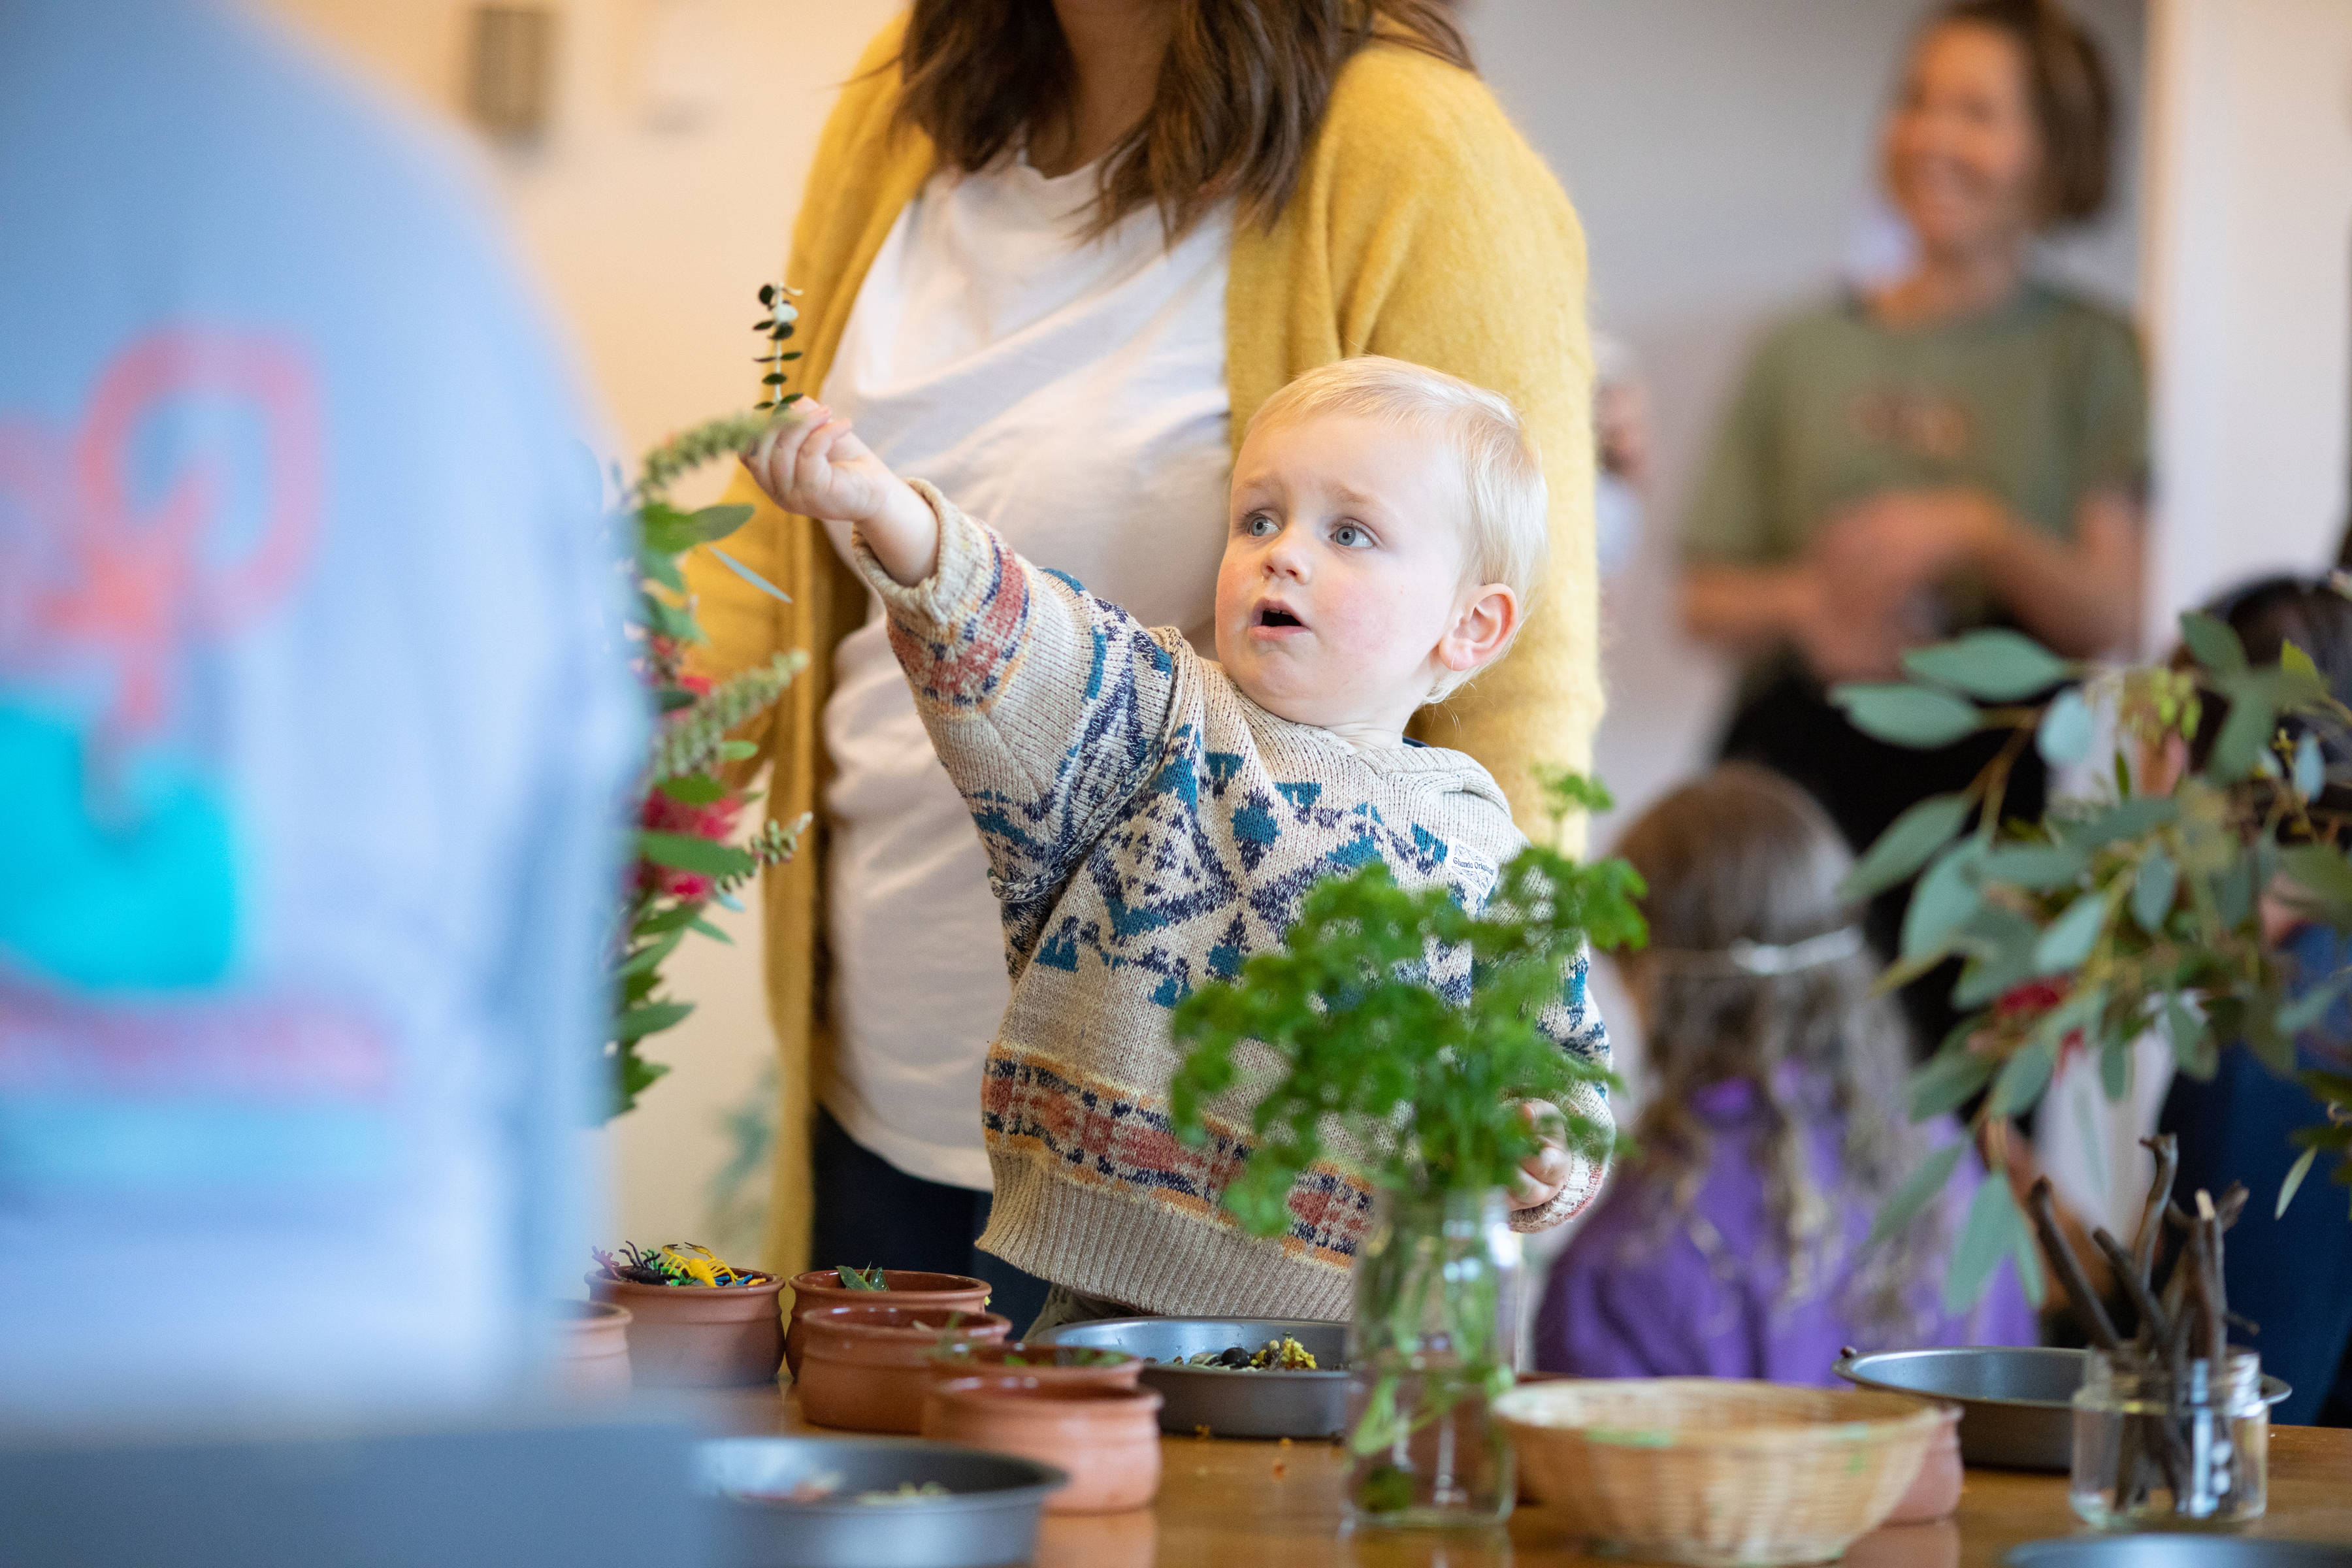 Teach Make Create ran a popular nature-based craft activity for children as part of the expo. Photo: Kieran Bradley.